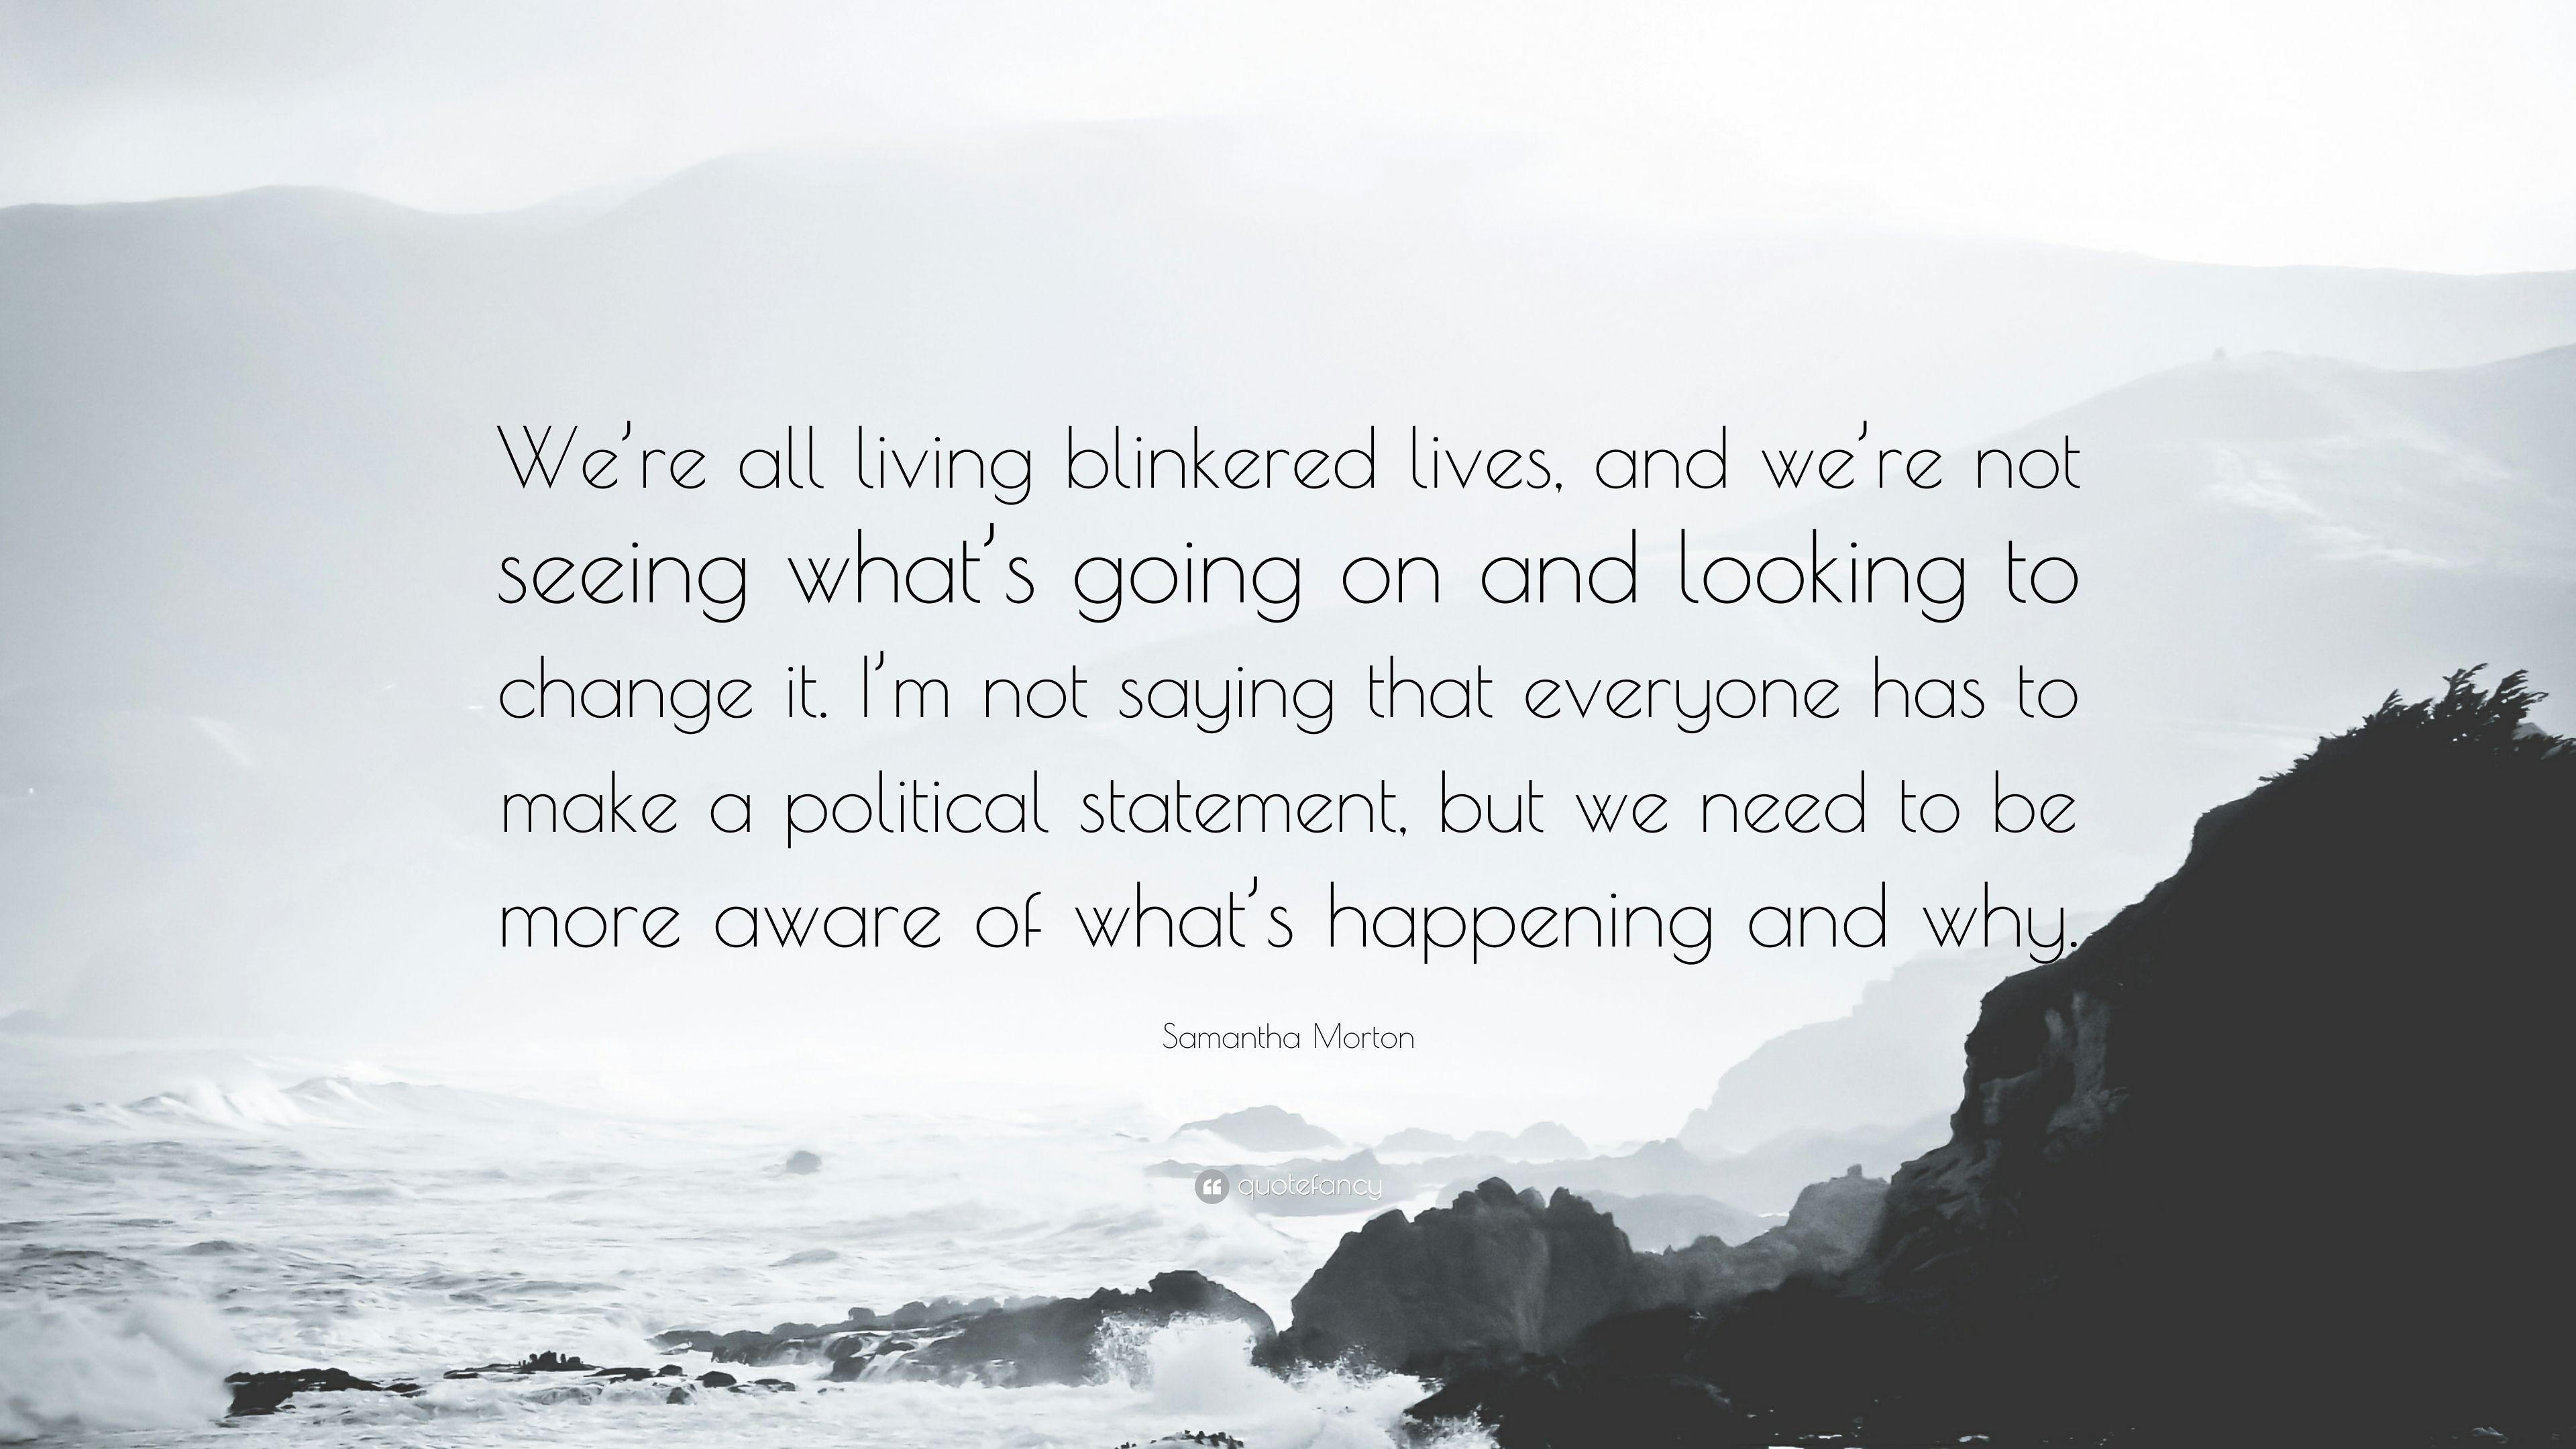 Samantha Morton Quote: “We're all living blinkered lives, and we're